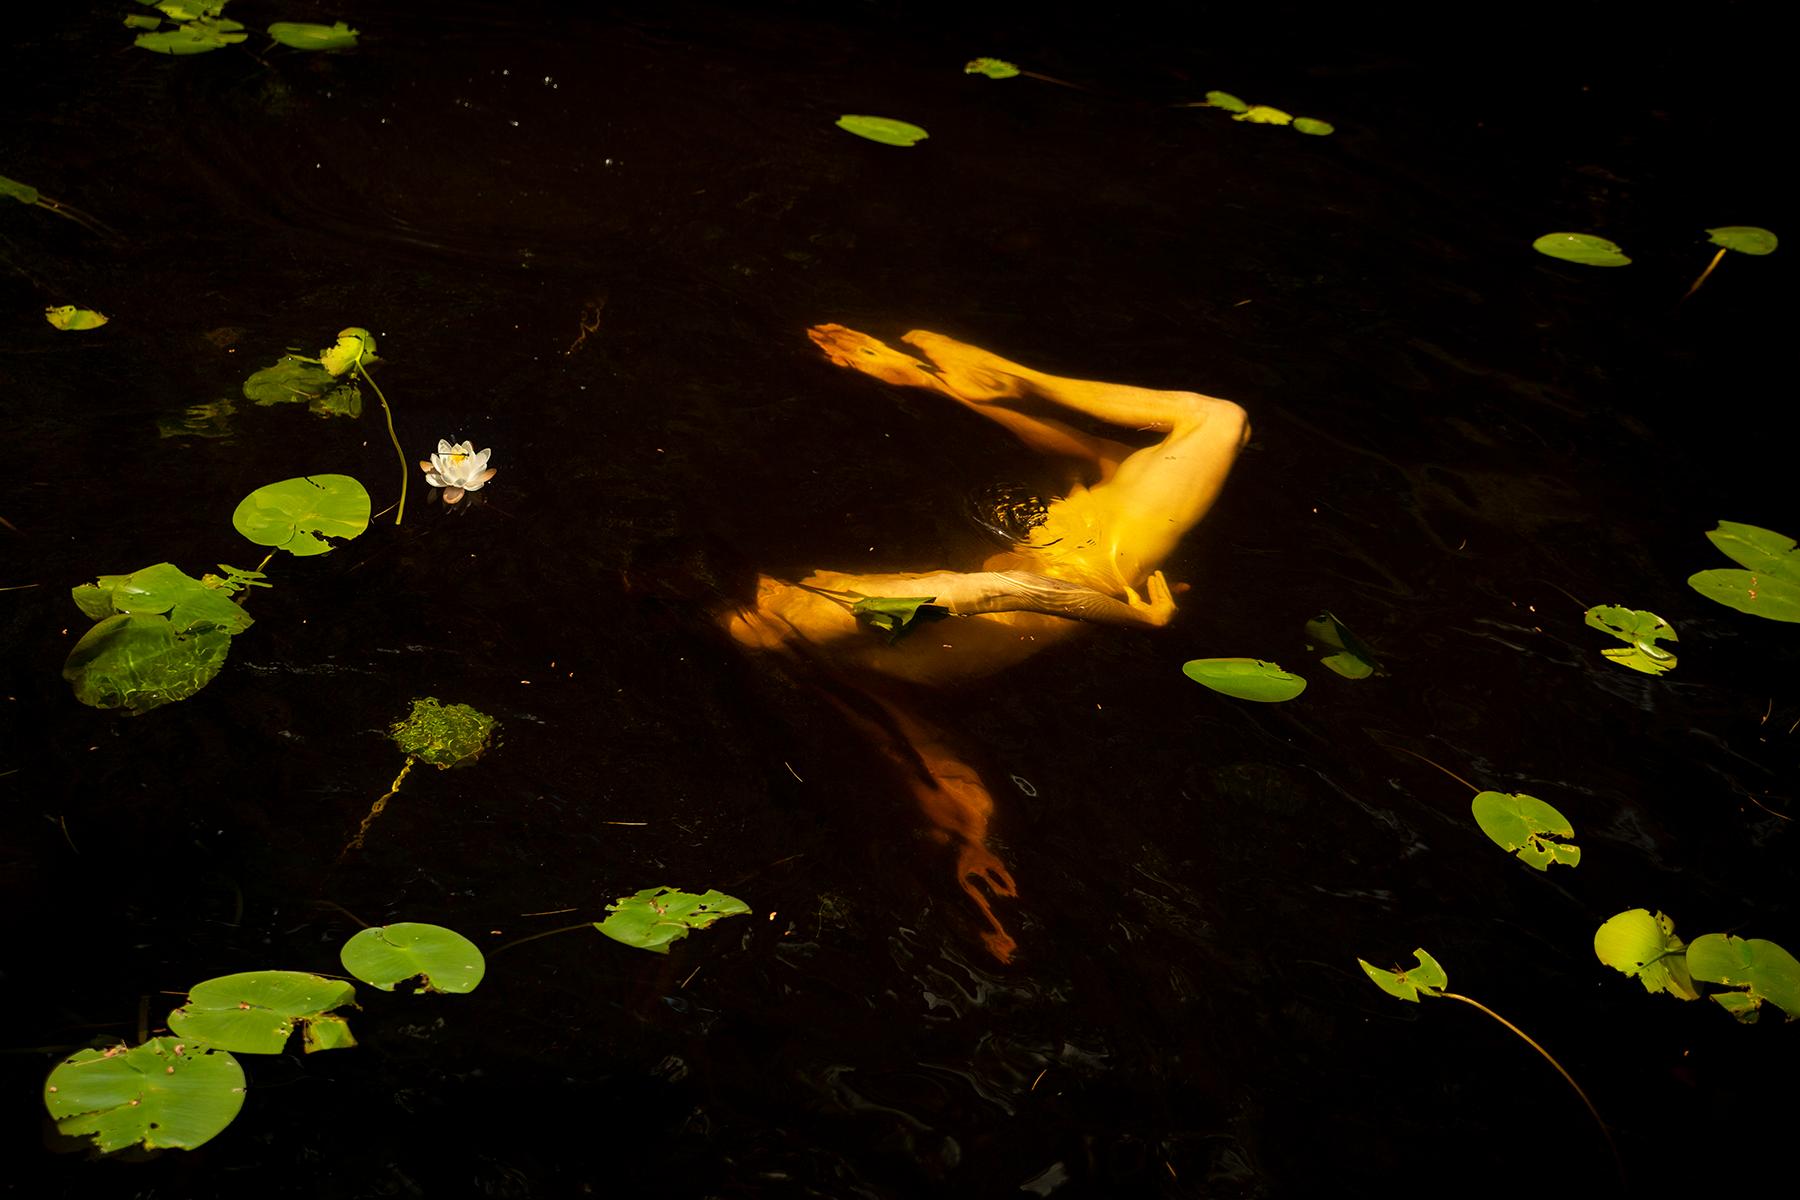 Ricky Cohete Figurative Photograph - Pond. From the series Water Lilies. Male Nude Dancer Color Photograph